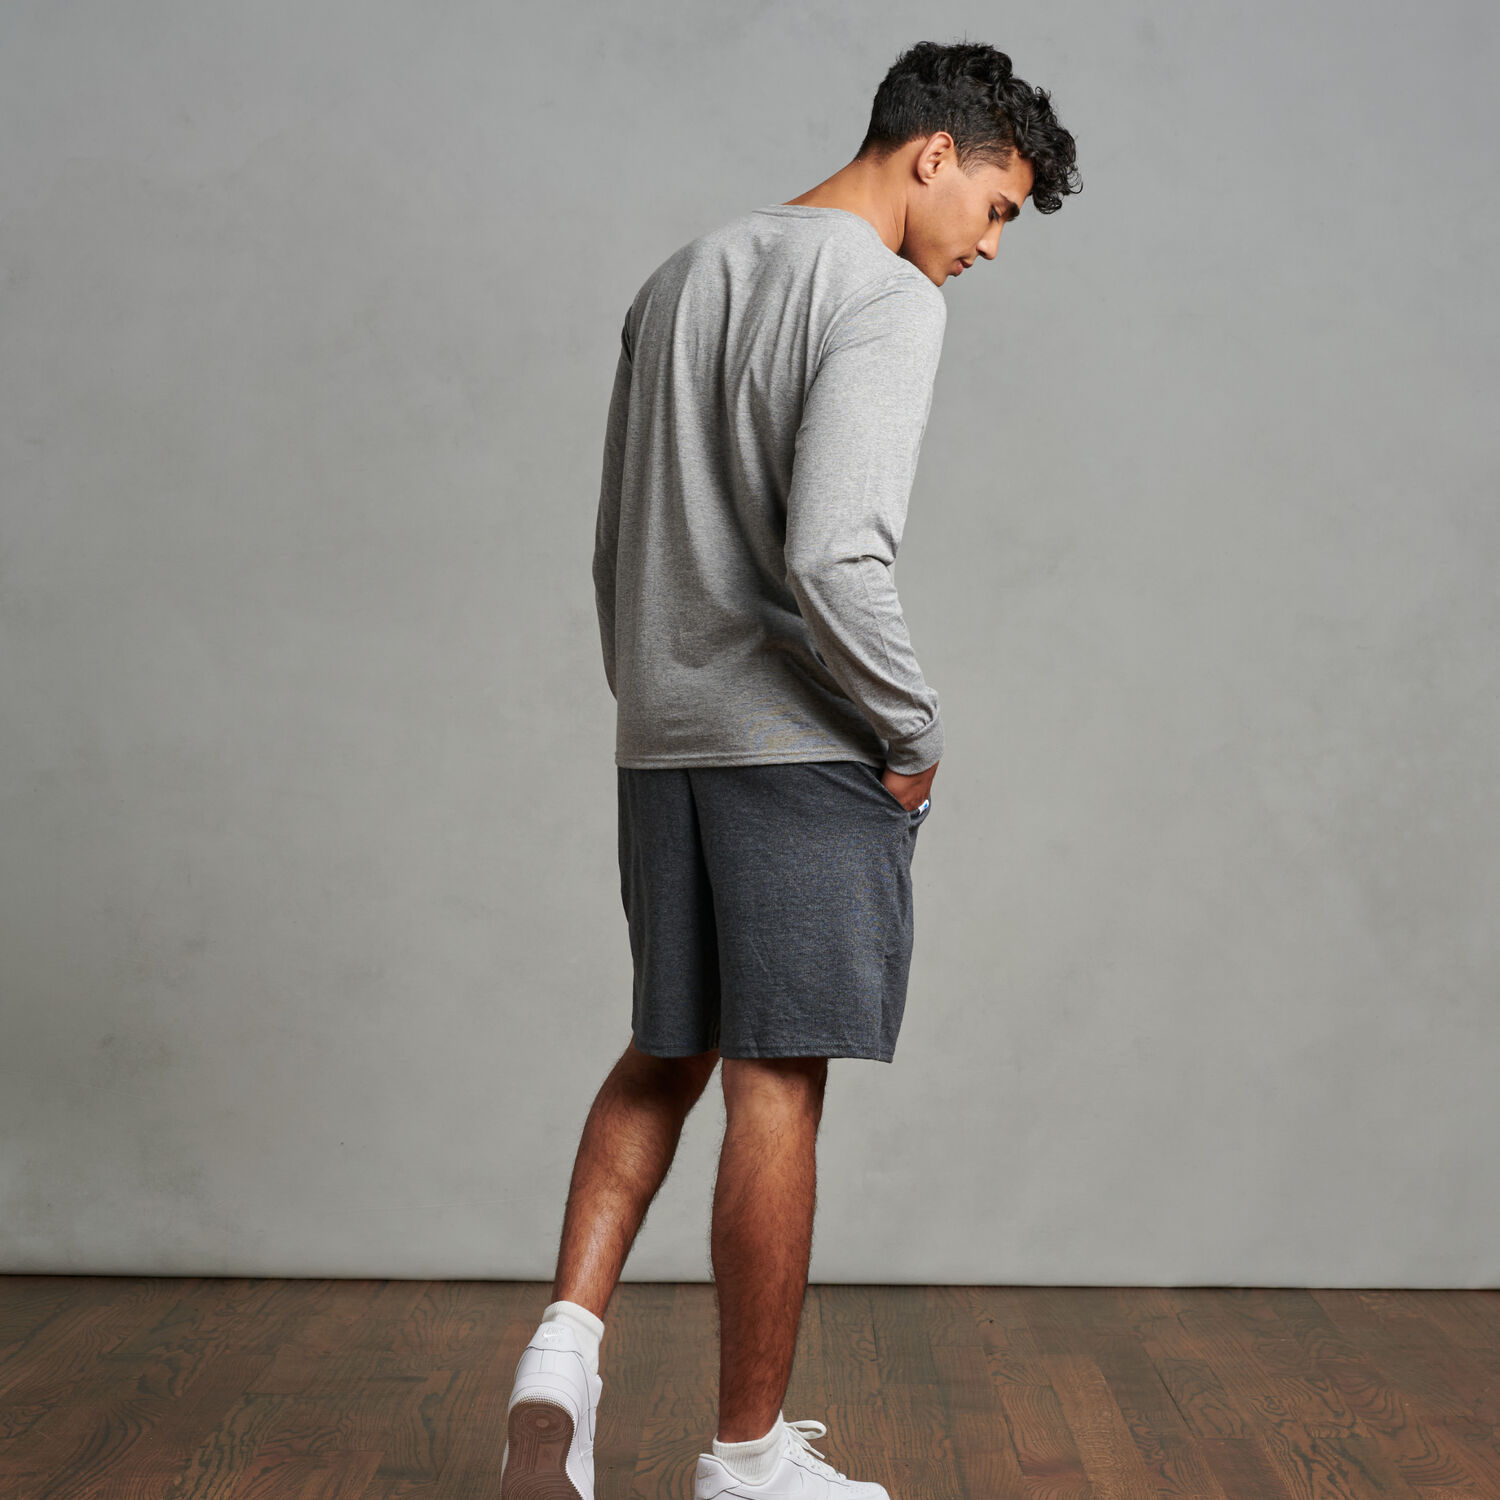 Wholesale Plain Sweat Shorts For A Cool, Stylish Look On Any